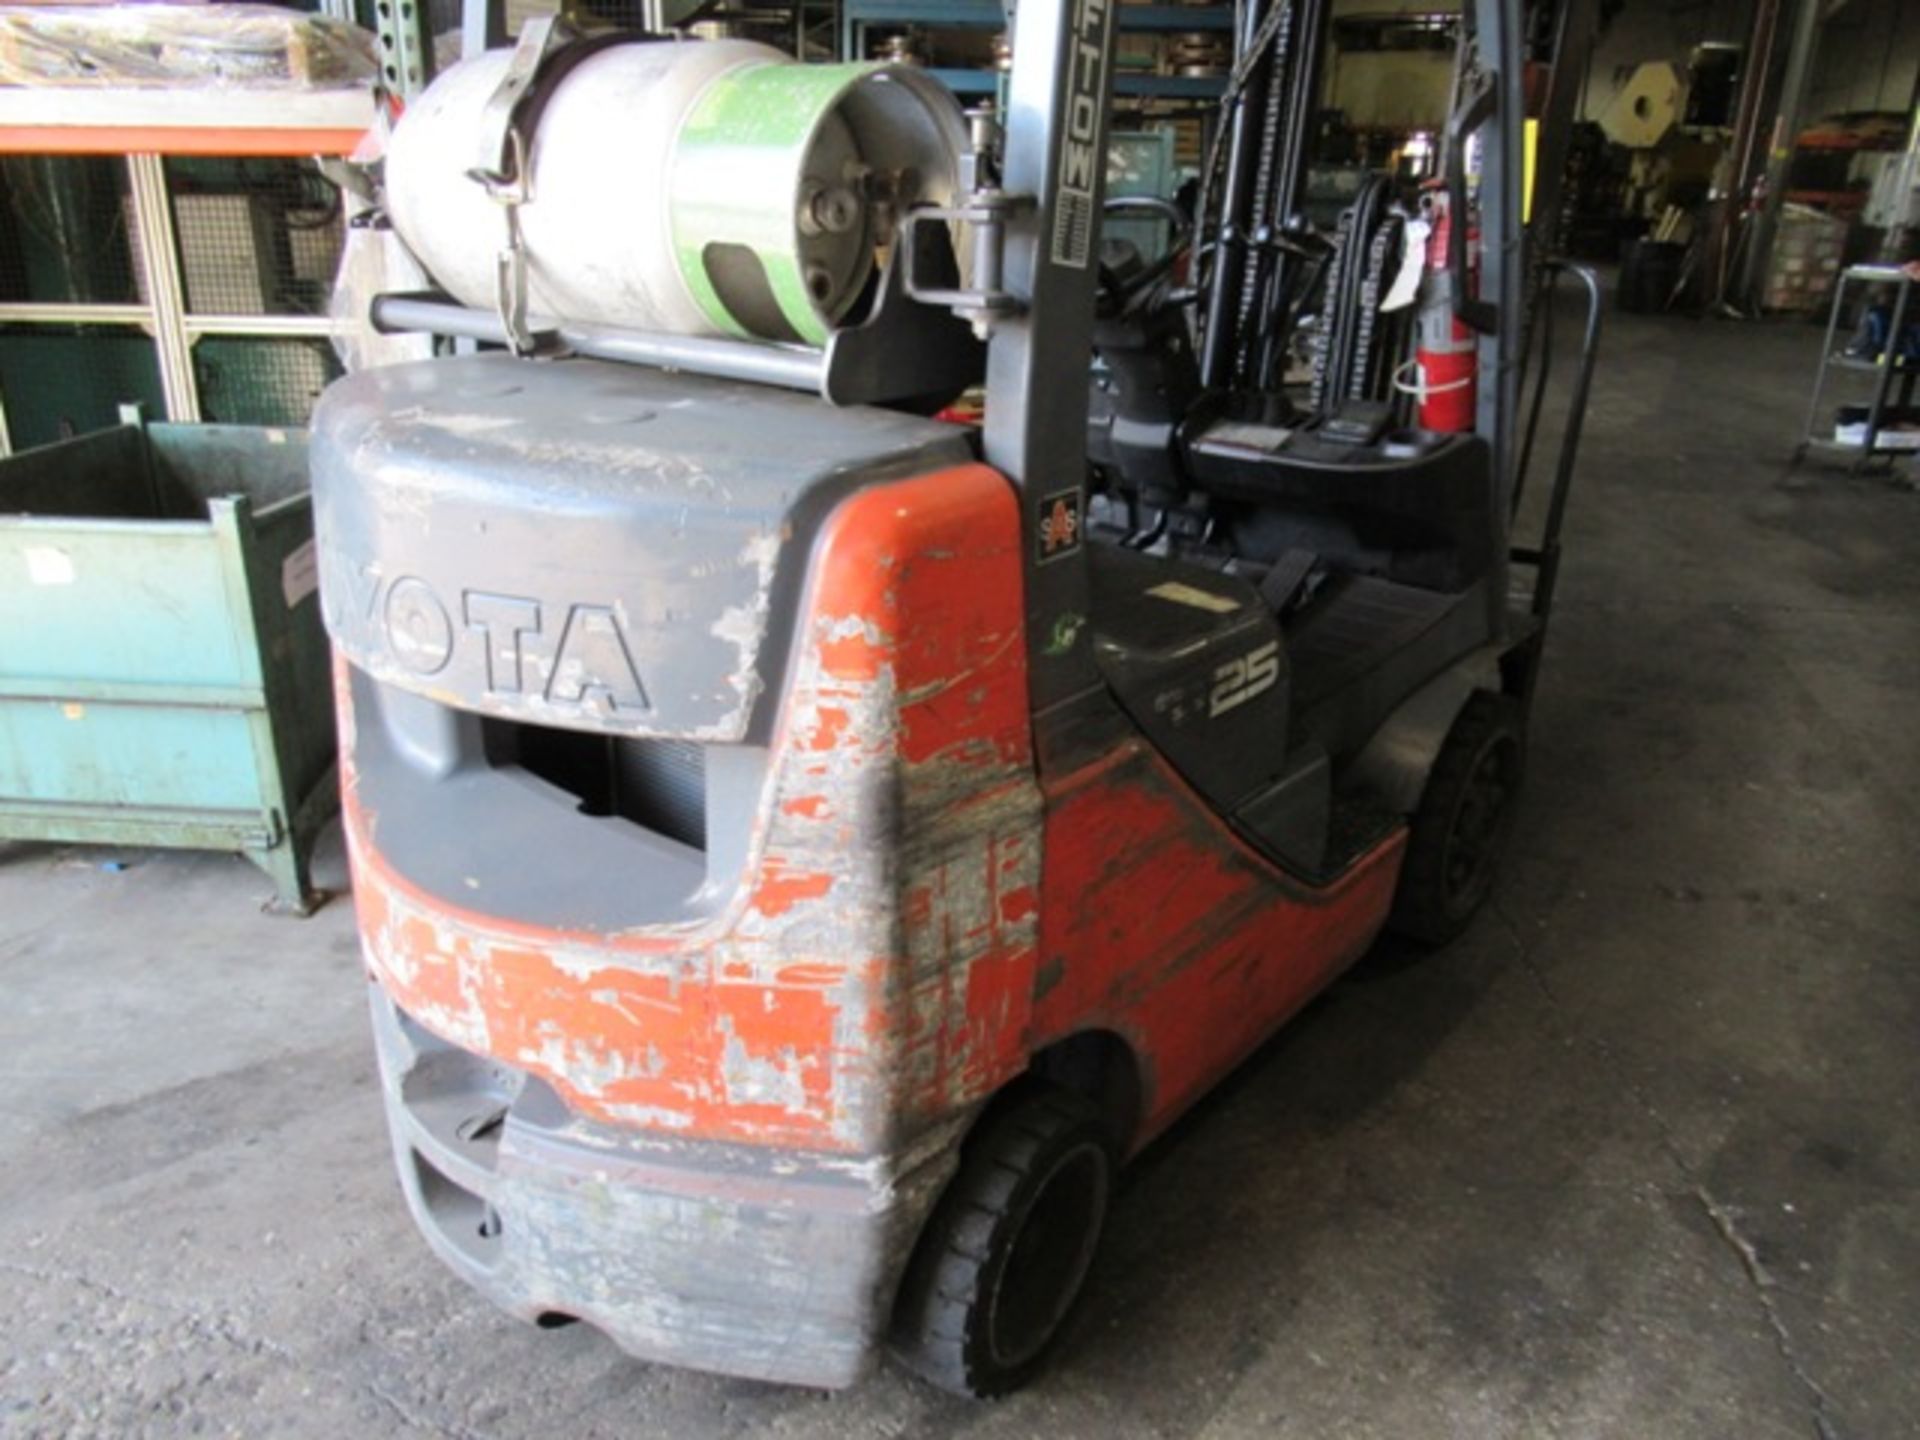 TOYOTA 8F9CU25 PROPANE FORKLIFT, 4,400# CAP., 3 STAGE W/SIDE SHIFT, SN 25435, NO TANK - Image 3 of 3